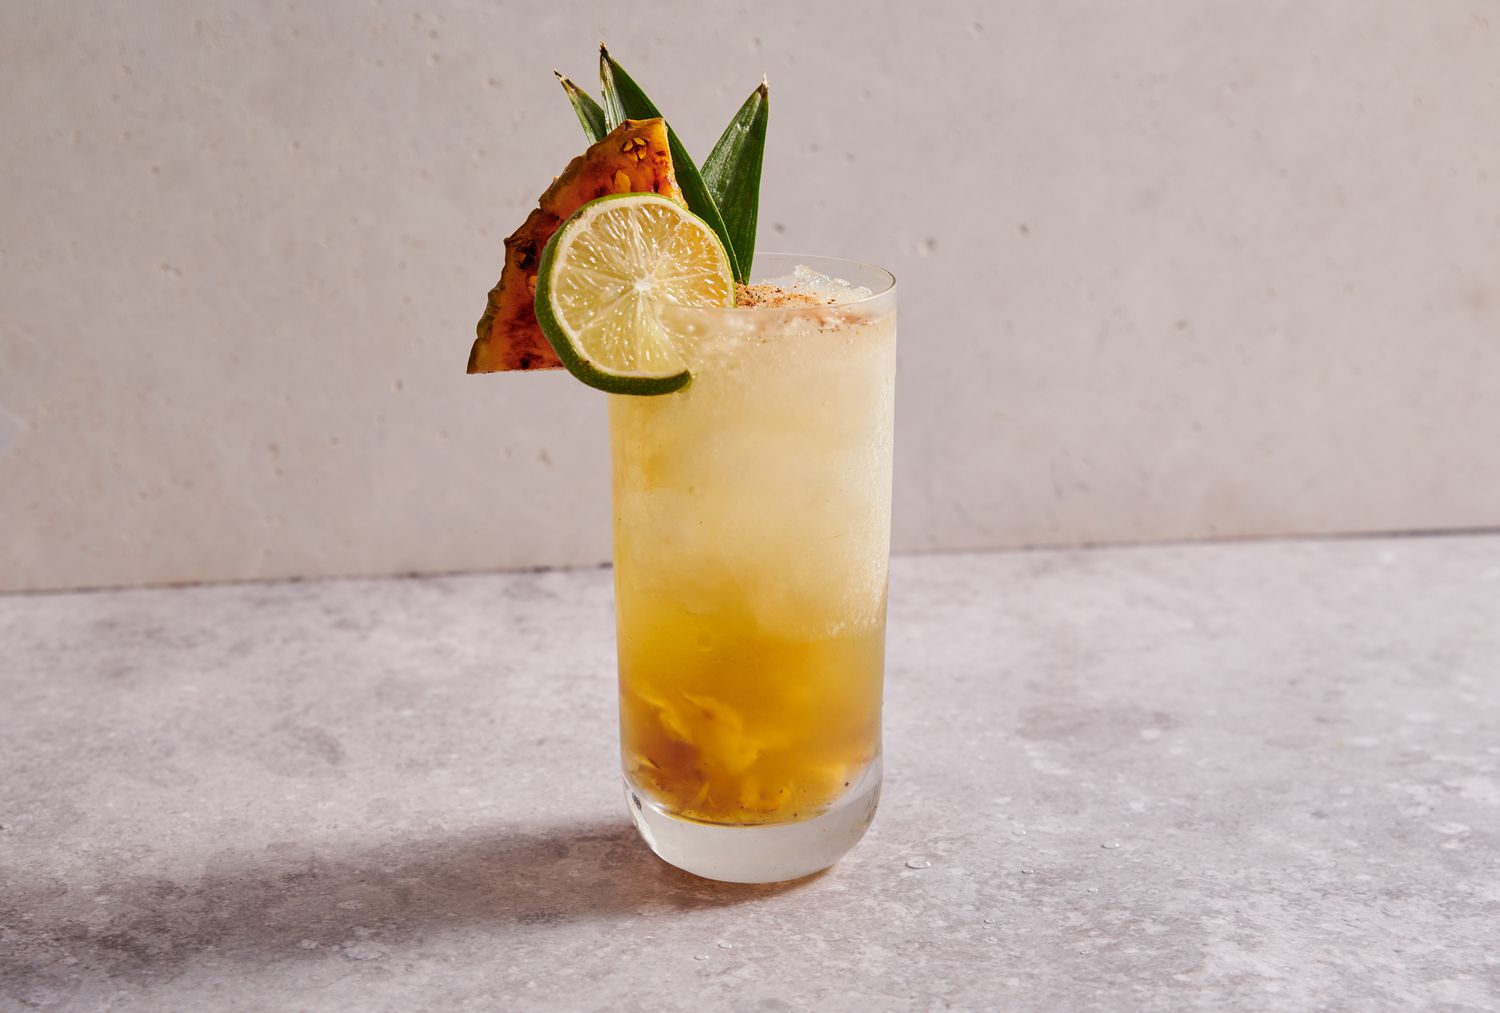 A grilled pineapple chartreuse swizzle cocktail, garnished with cinnamon, grilled pineapple, lime, and pineapple fronds